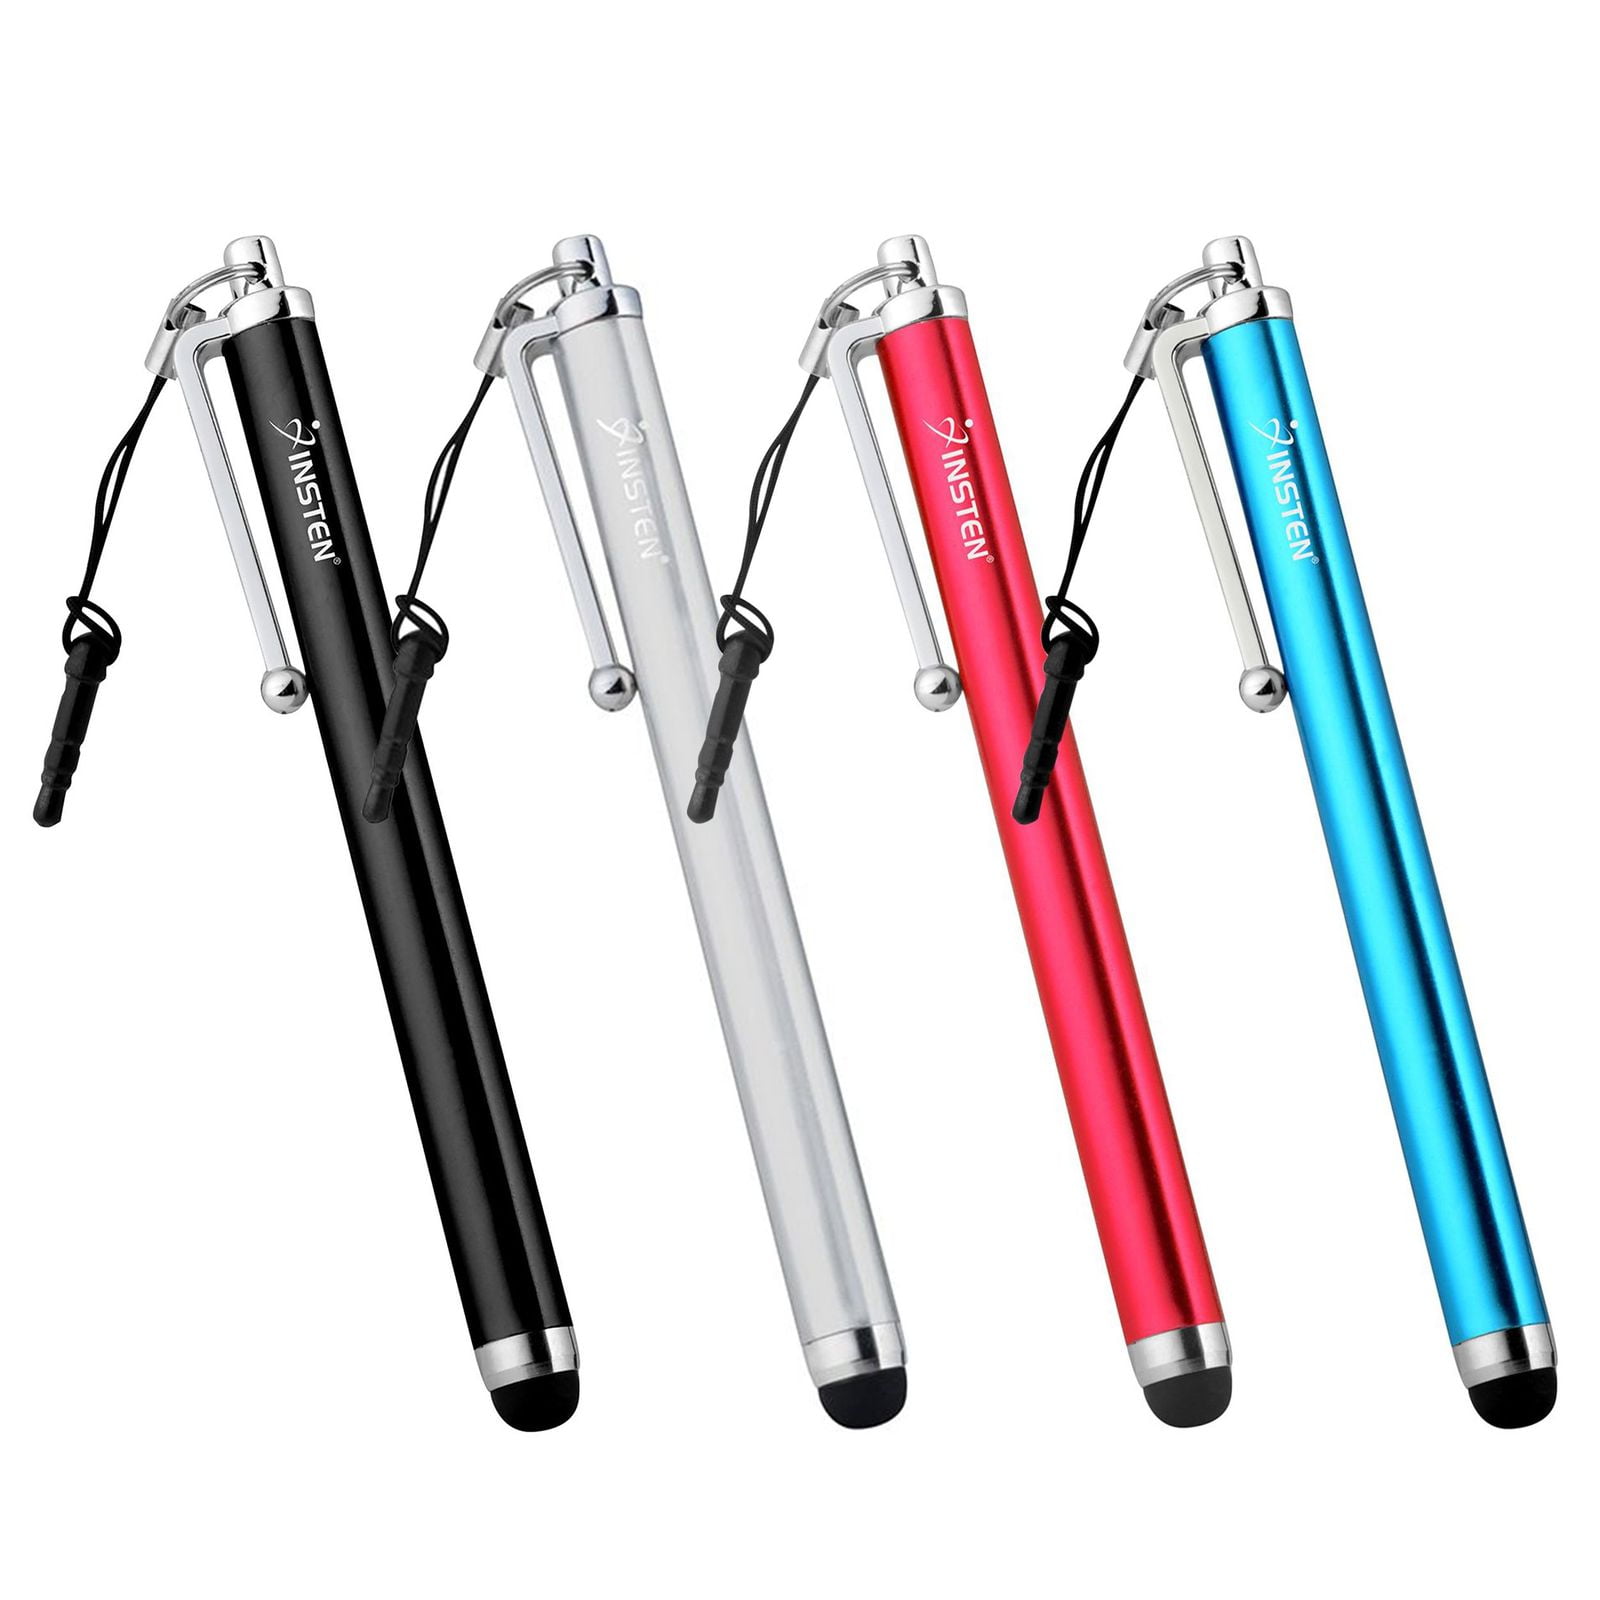 Touch Screen Pen Stylus Pencil Dust Plug Cap For Ipad Iphone Samsung Tablet PC